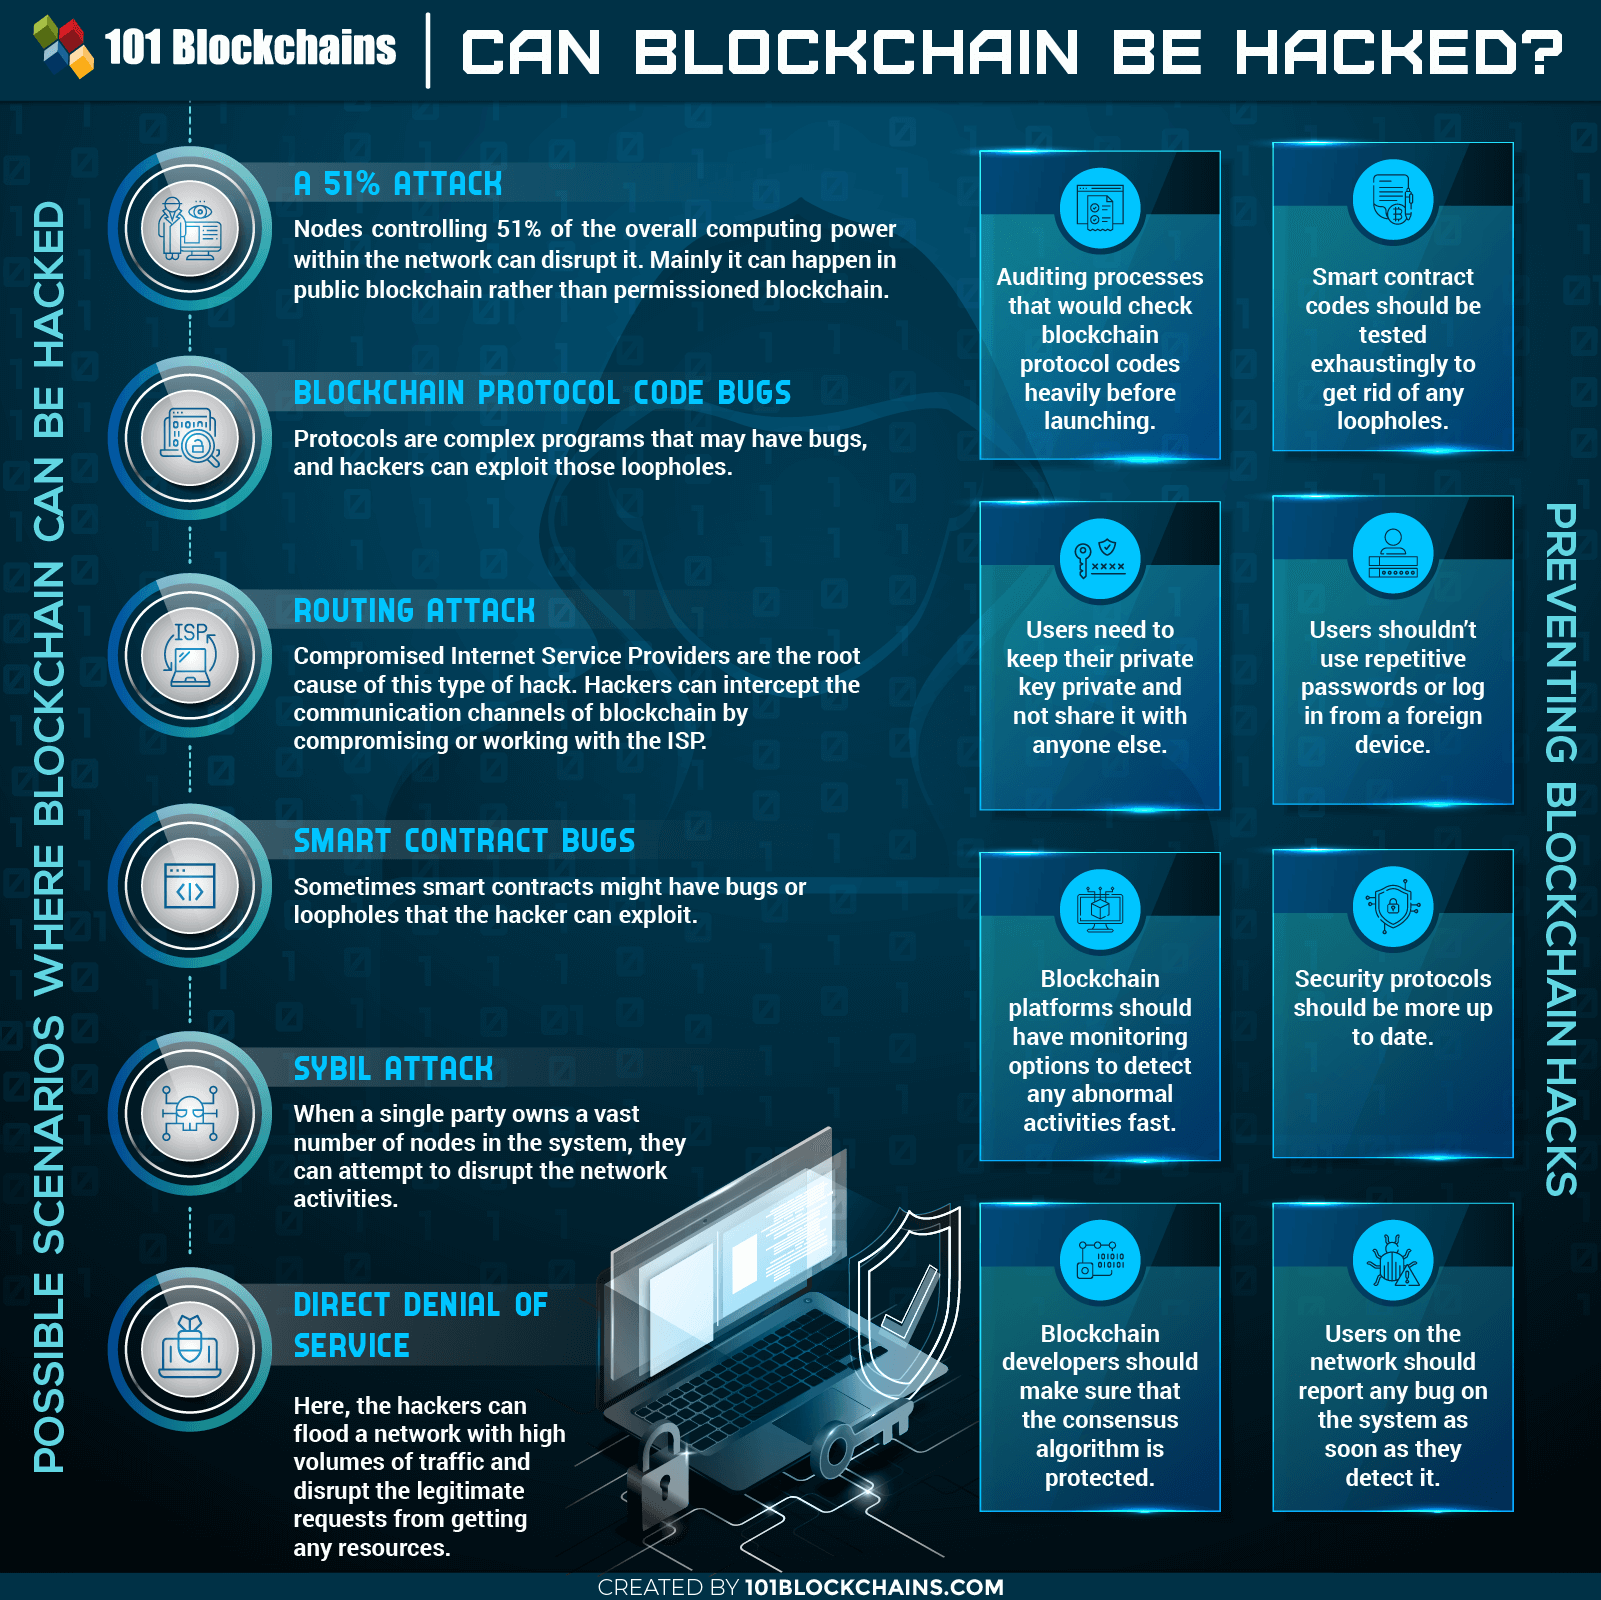 Can Blockchain Be Hacked?